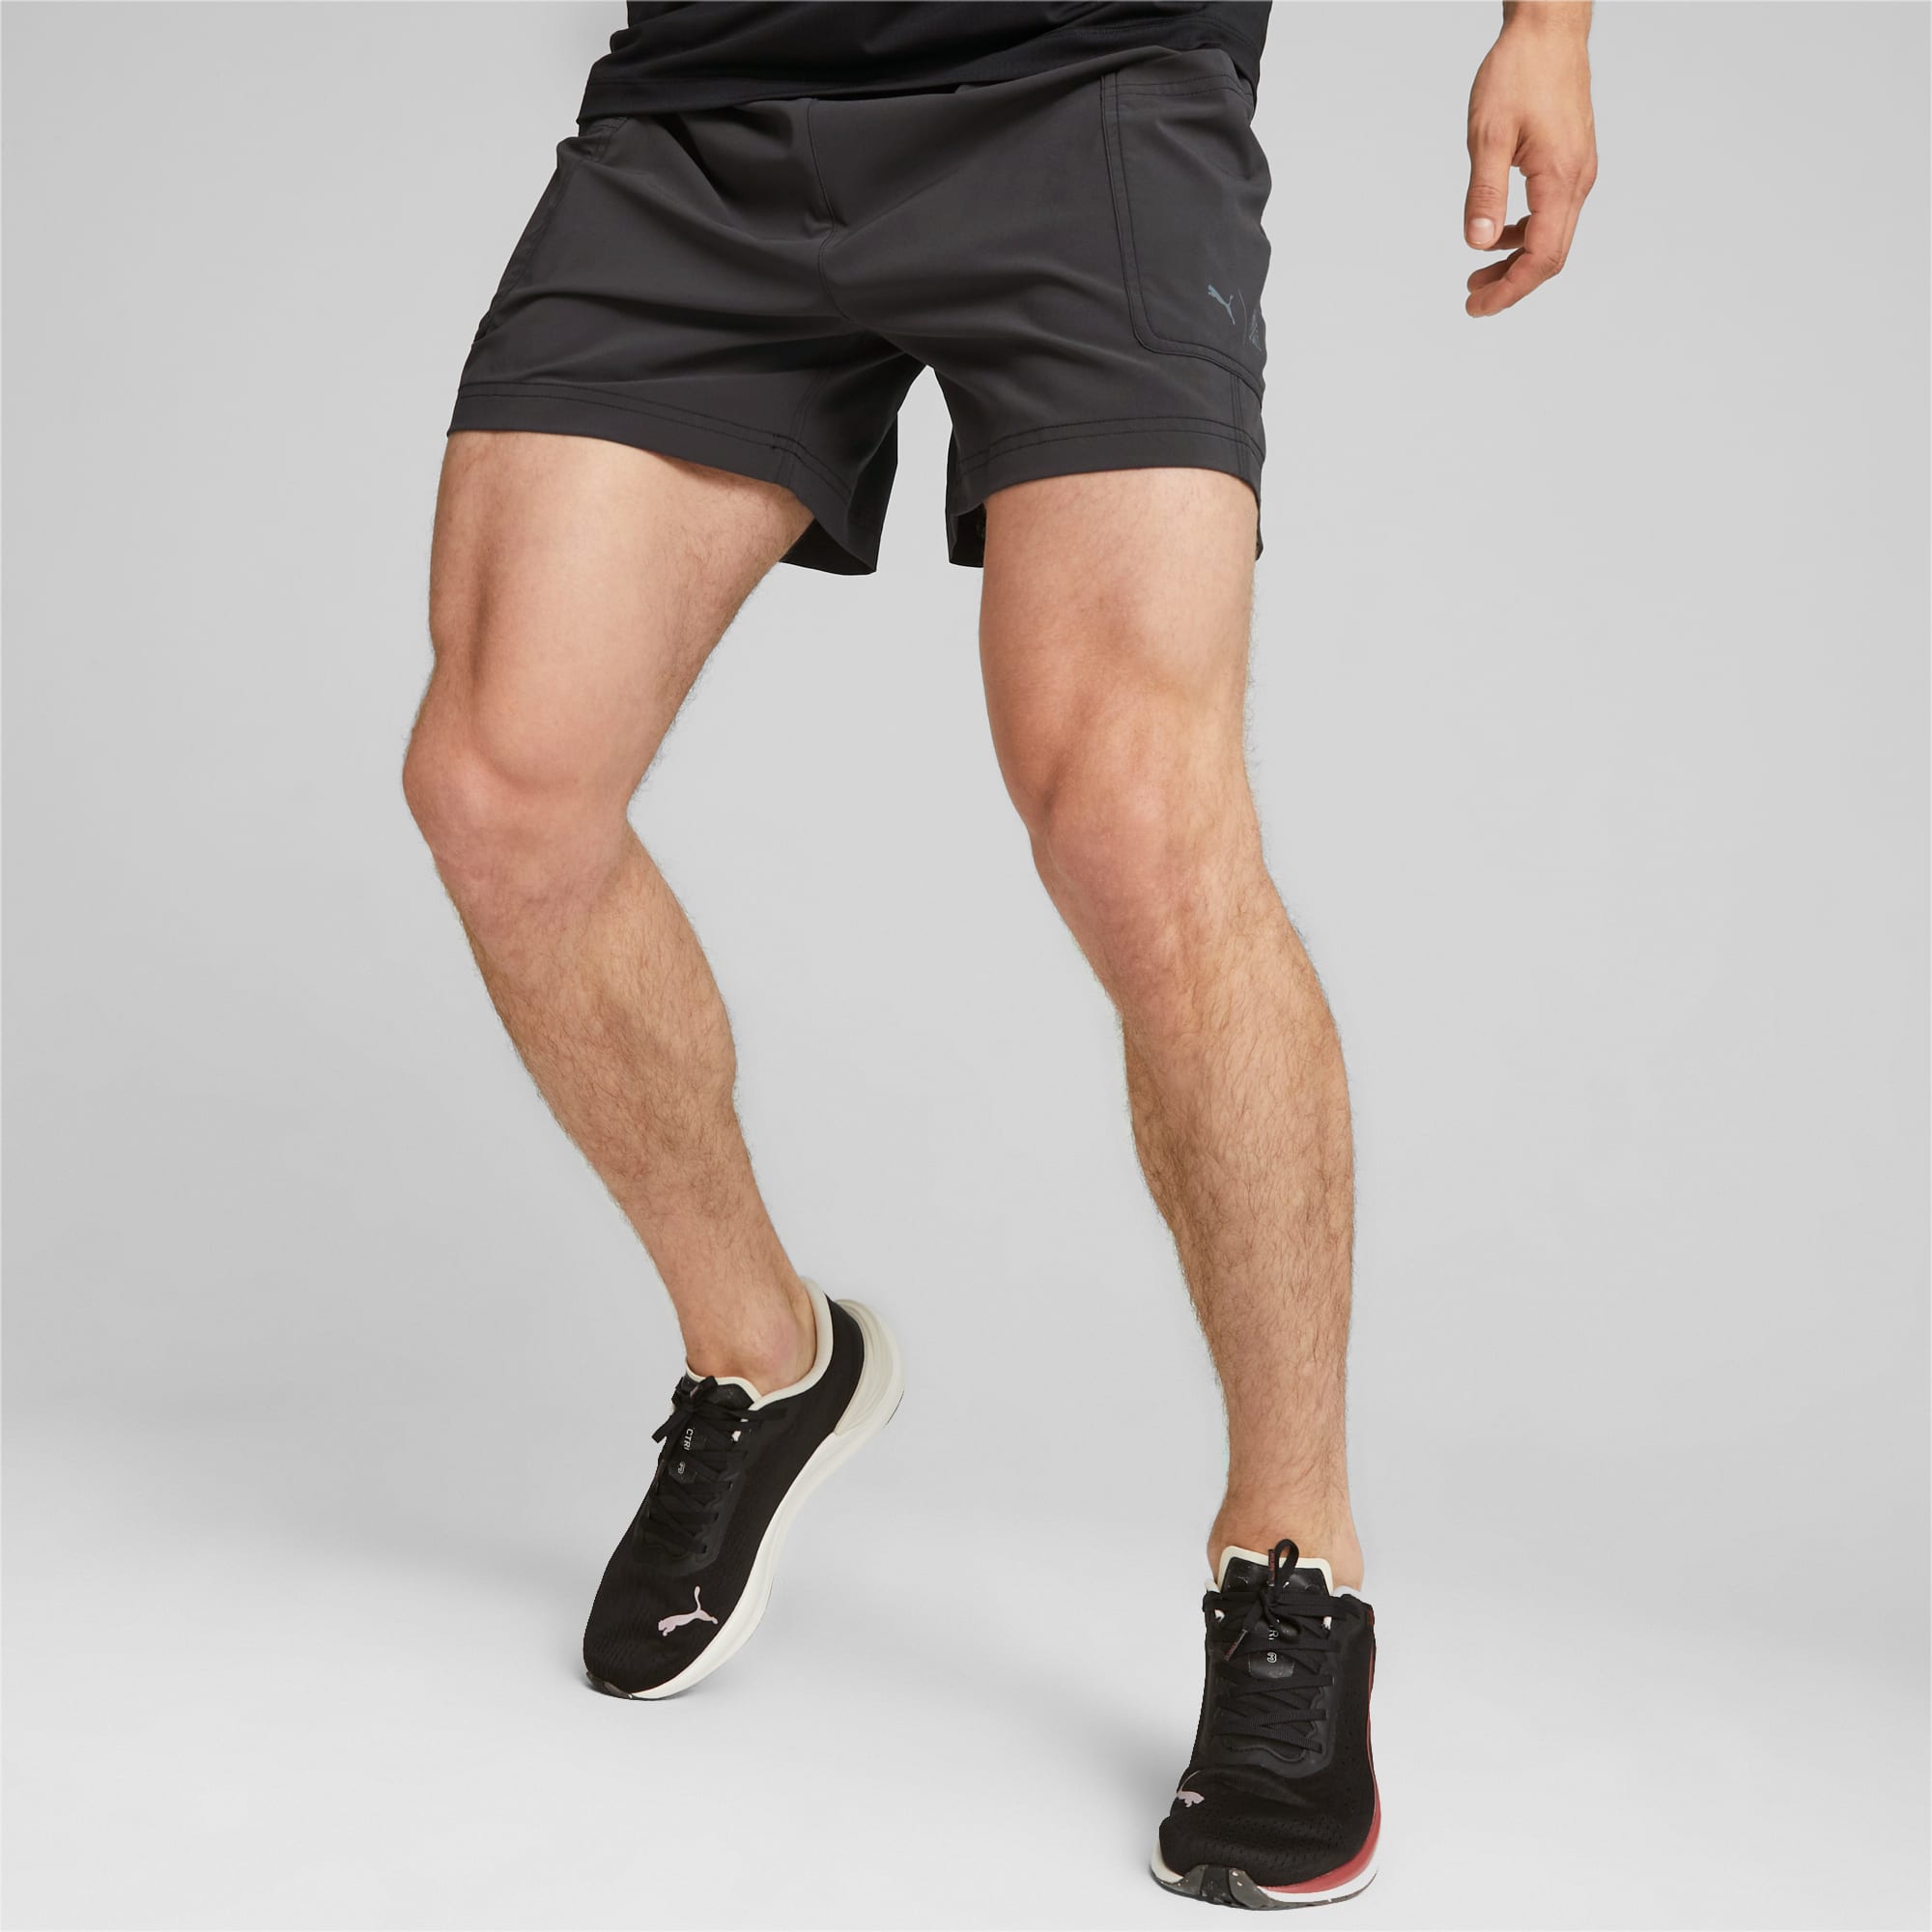 jogger shorts – first threads